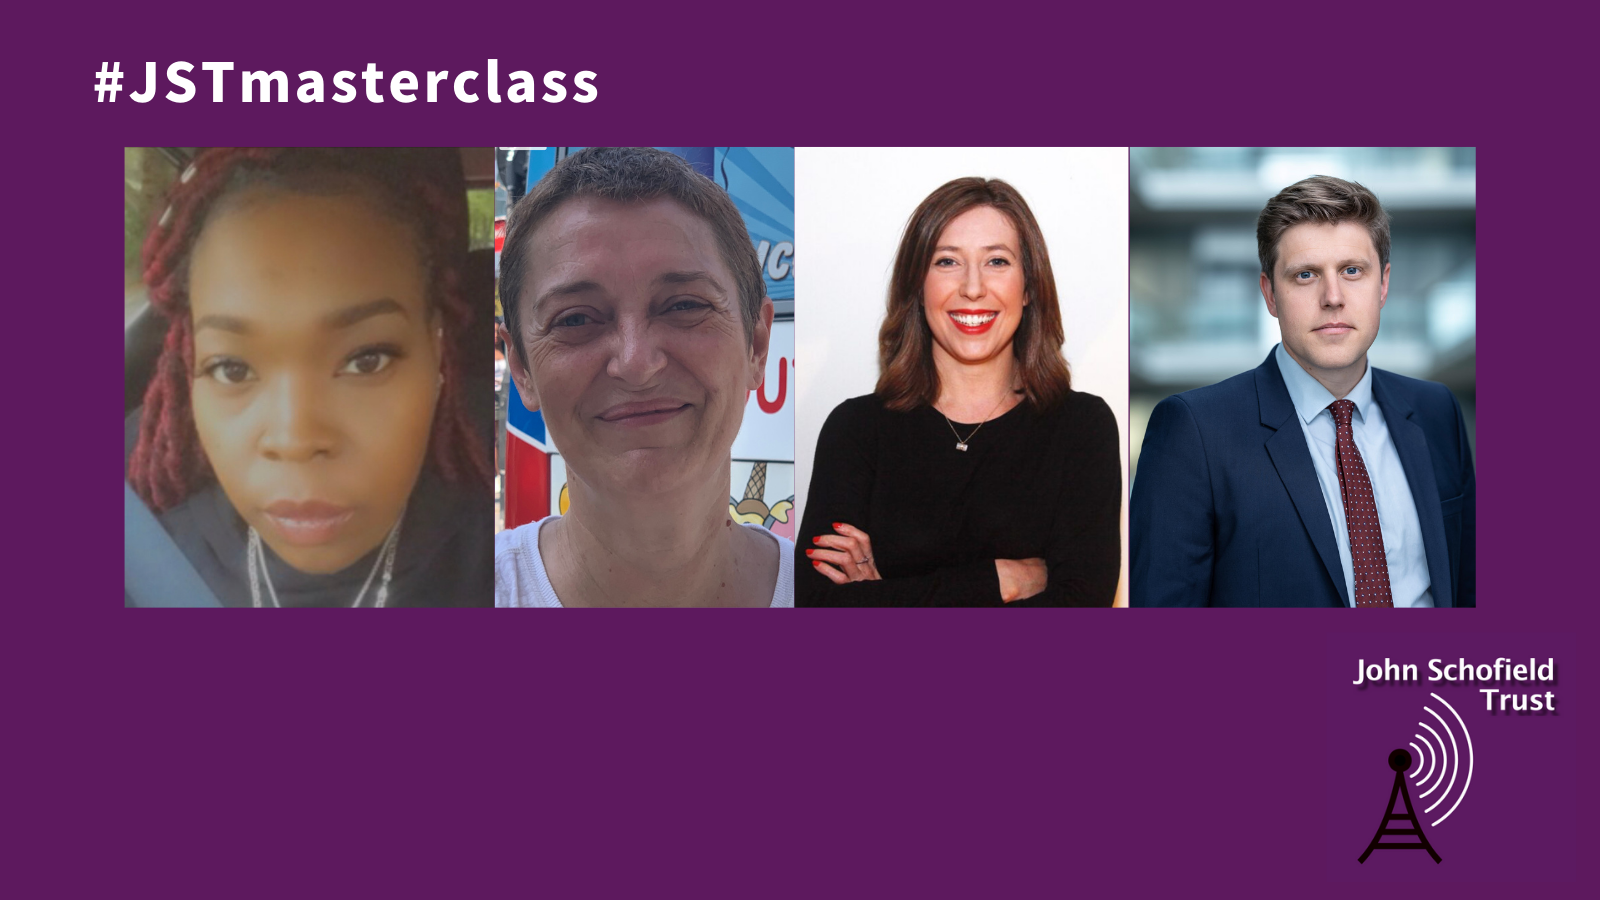 Purple graphic with photos of (L-R) Fransoy Hewitt, Sarah O'Connell, Imogen Barrer and Daniel Hewitt. In the top left is #JSTmasterclass and in the bottom right is the Trust logo.